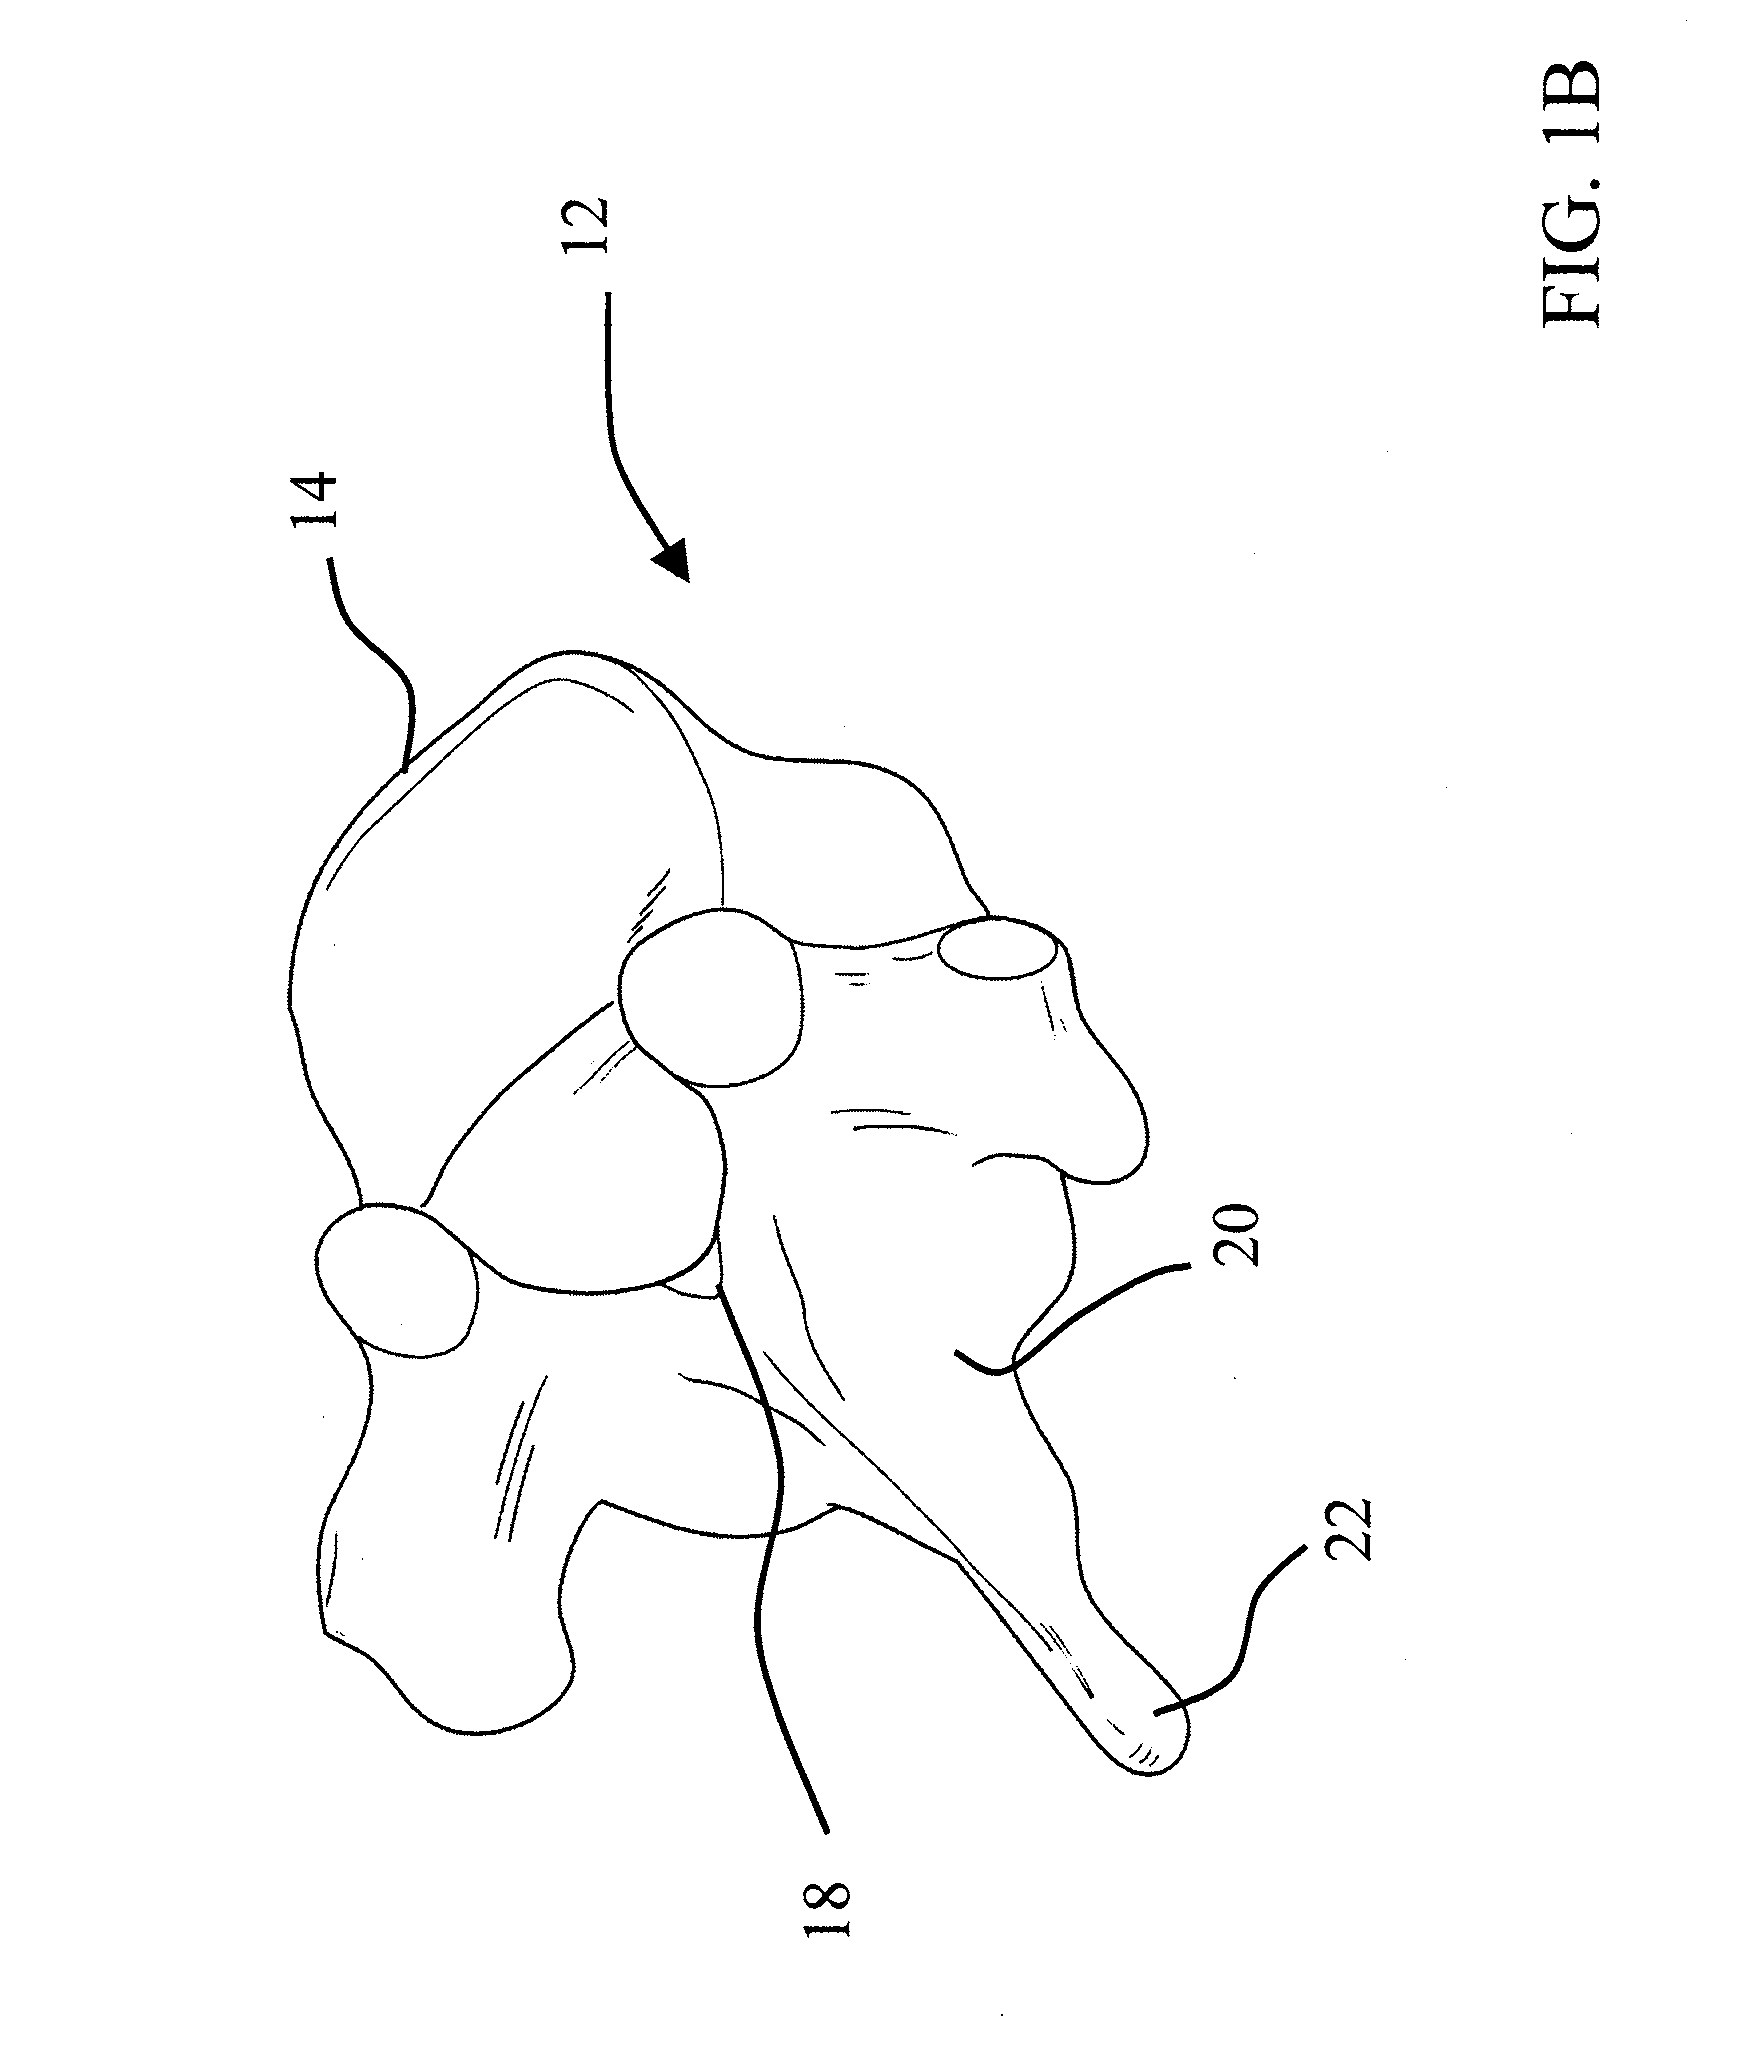 Implantable devices and methods for treating micro-architecture deterioration of bone tissue